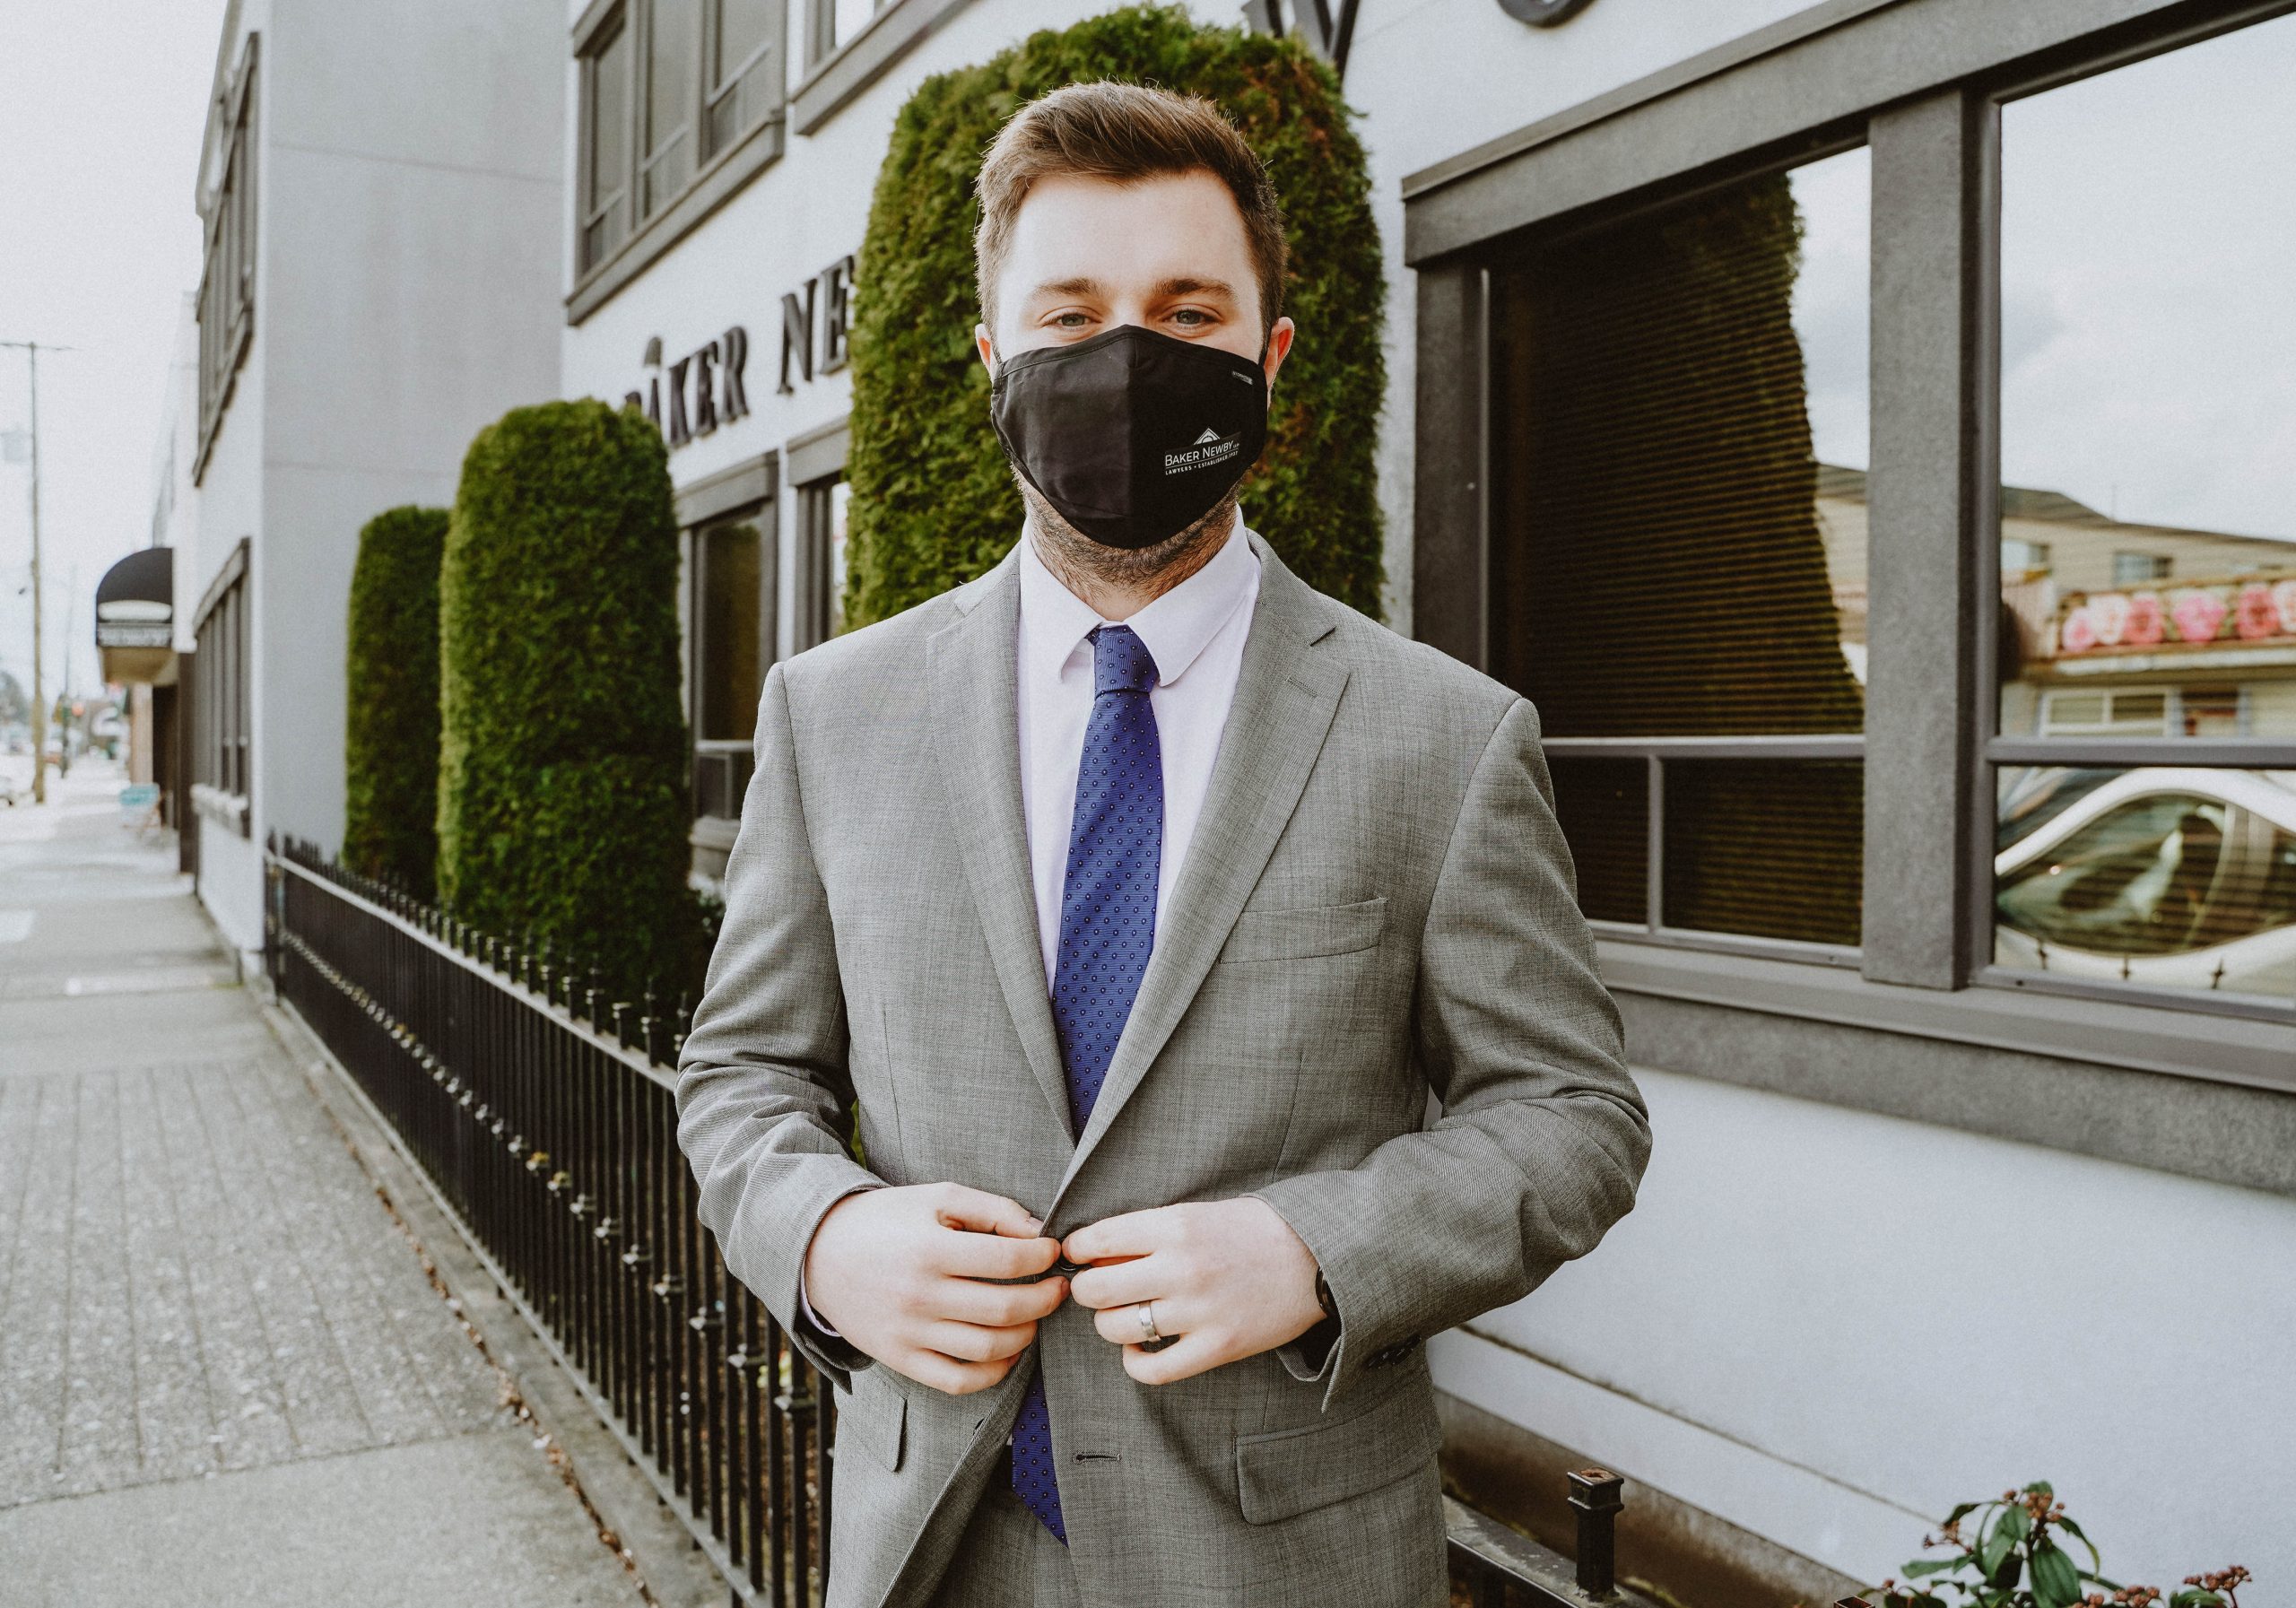 Baker Newby Lawyer with a mask